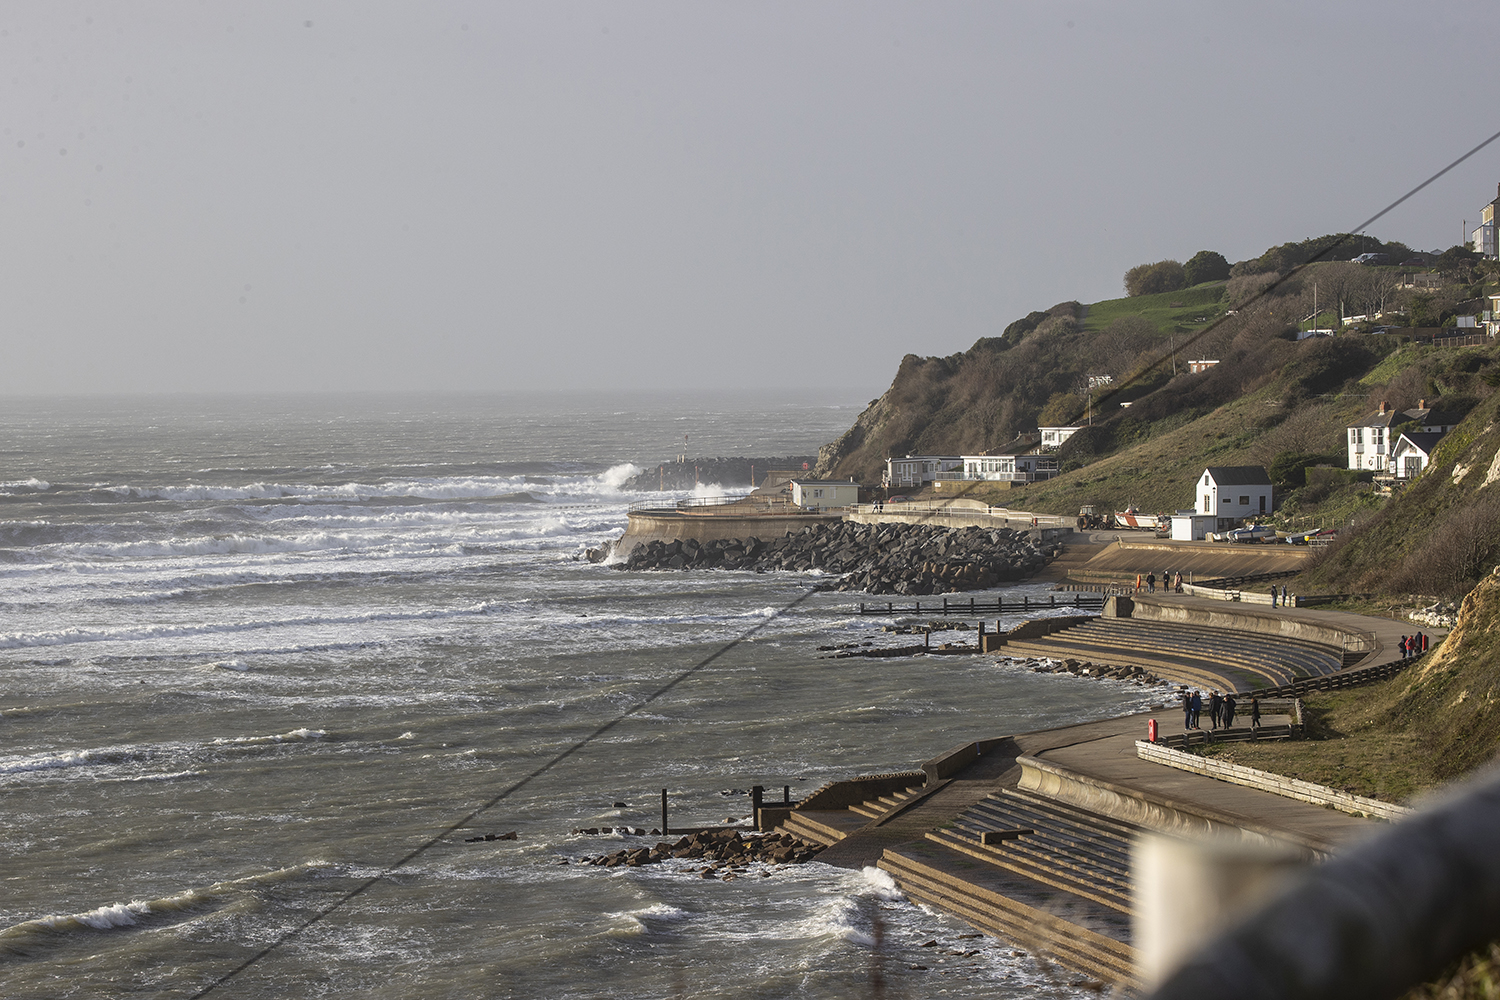 Looking up to Ventnor from Bonchurch